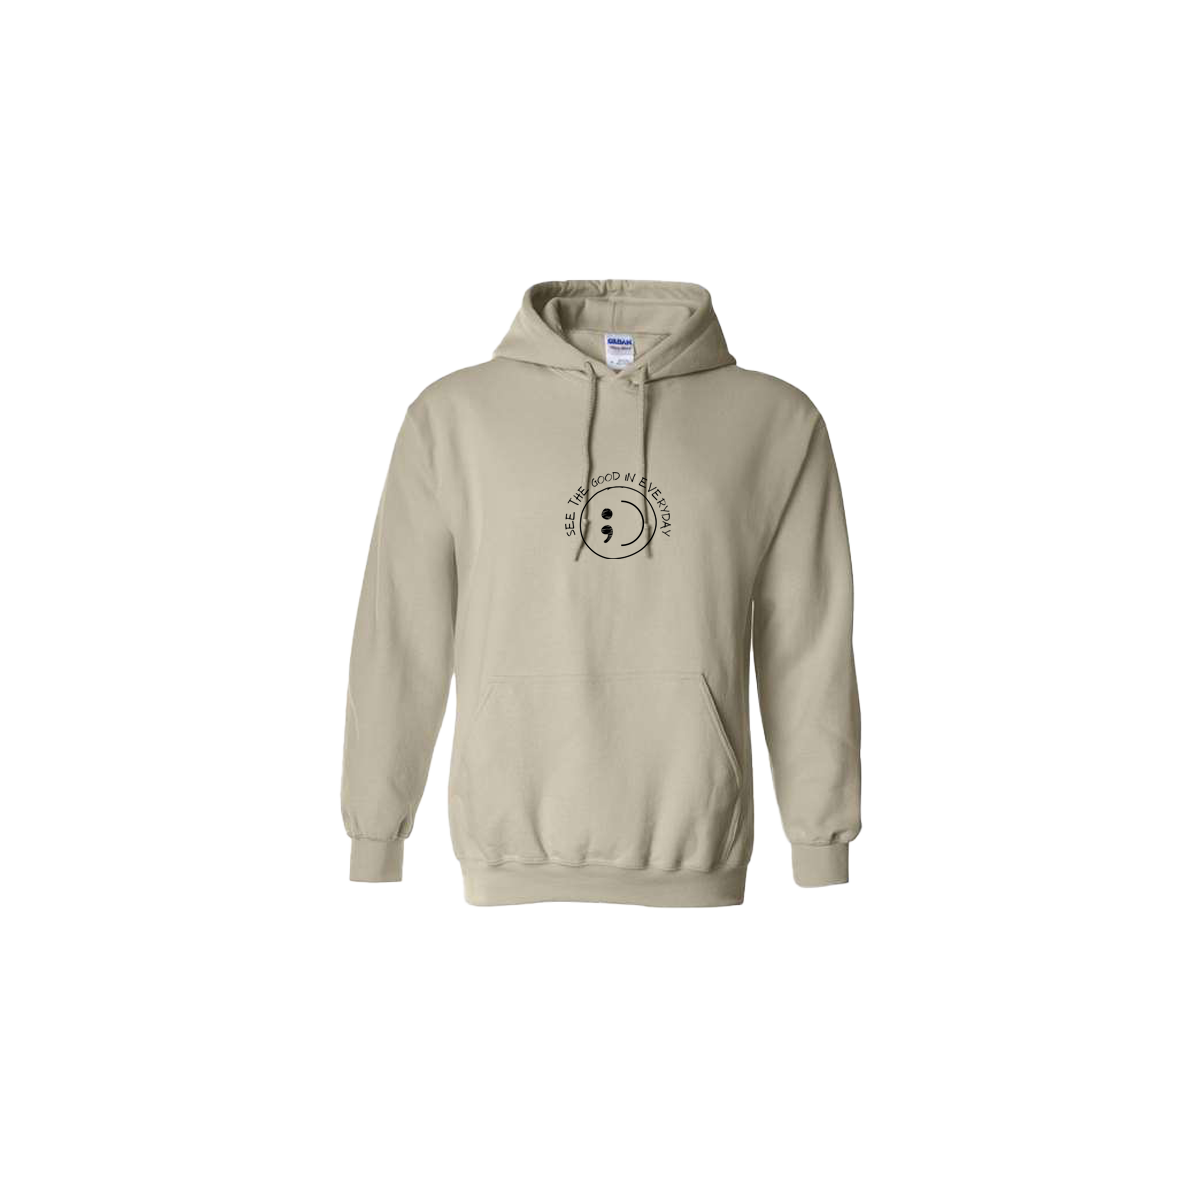 See the Good in Everyday Smiley Embroidered Beige Hoodie - Mental Health Awareness Clothing